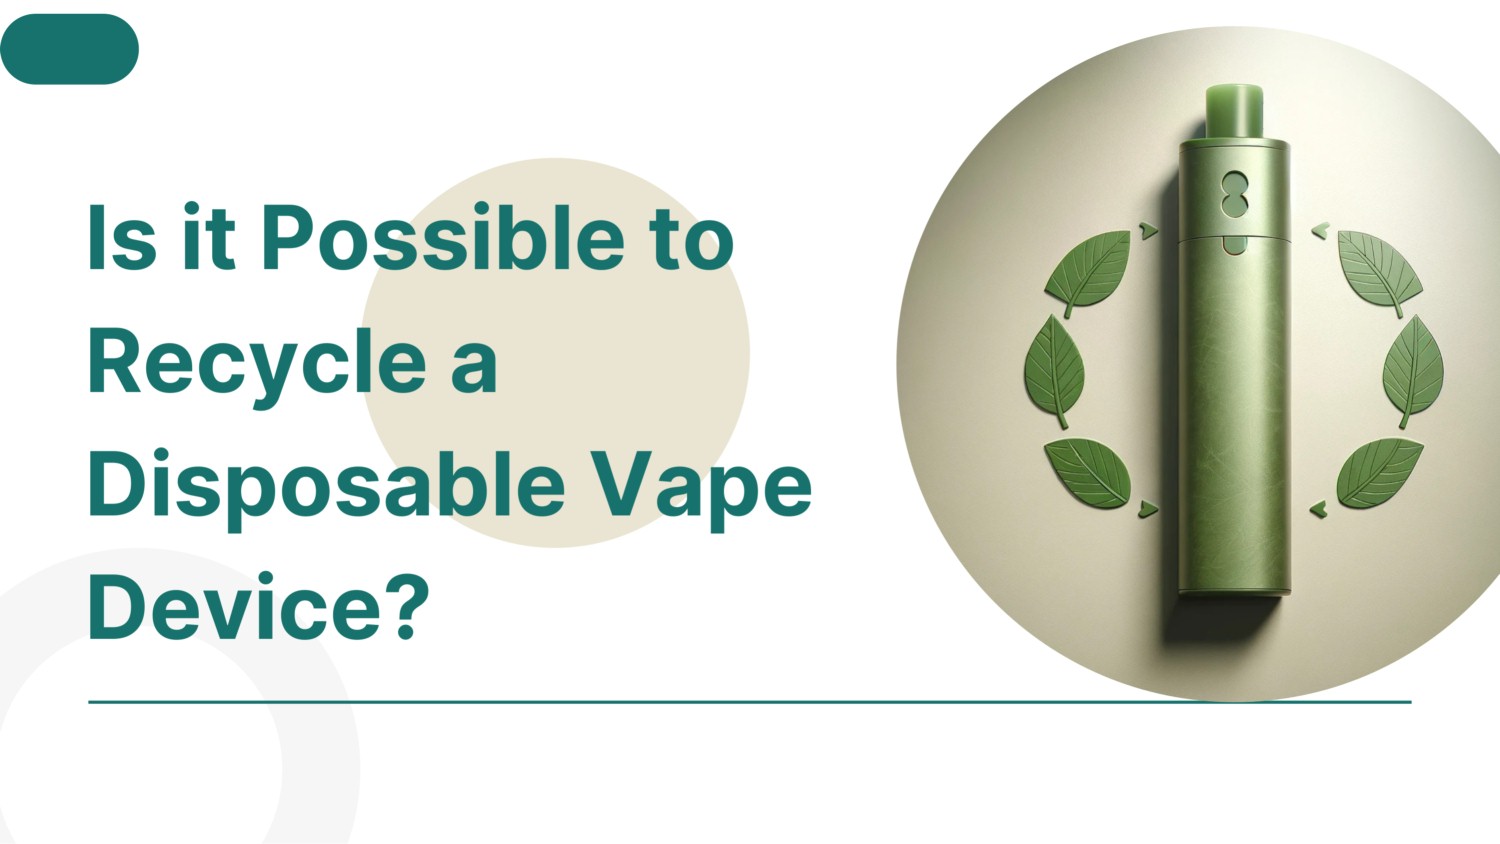 Is it Possible to Recycle a Disposable Vape Device